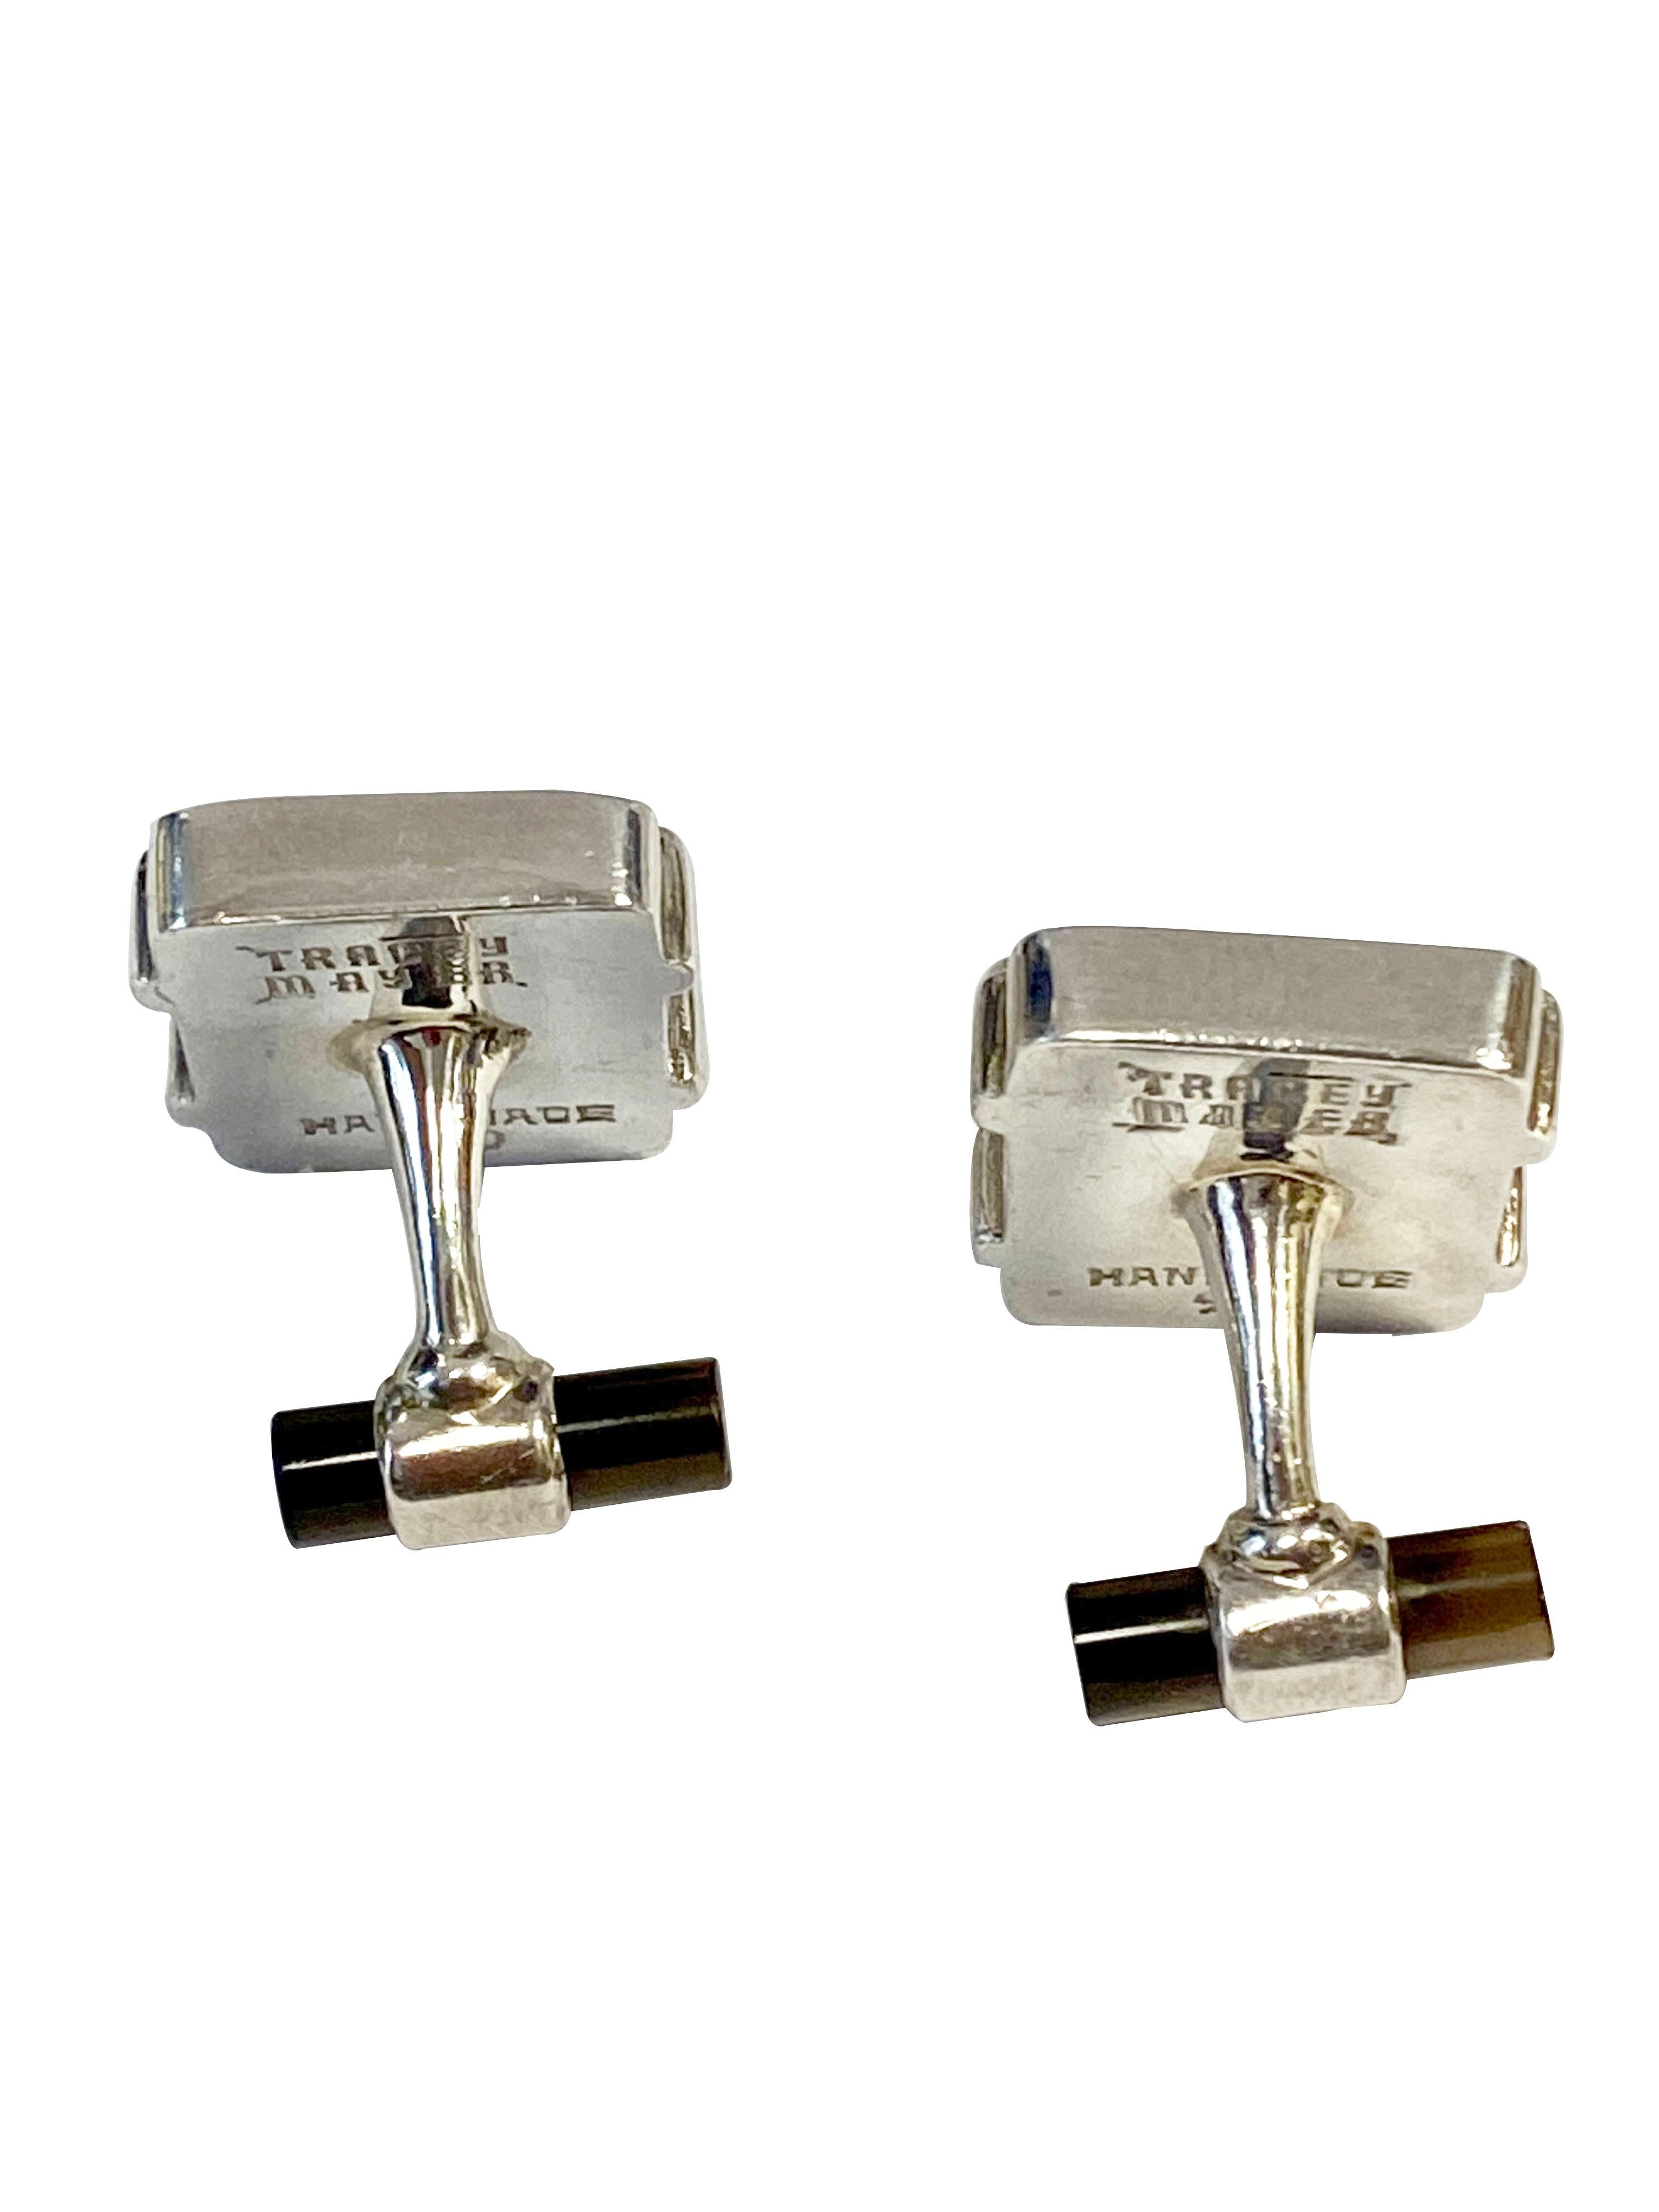 Circa 2018 Sterling Silver Cufflinks by Designer Tracey Mayer,  having a carved Bone top with en engraved Chinese Good Luck Symbol, and a Smokey Quartz Topaz set in the toggle portion. The tops measure 1 X 3/4 inch. 